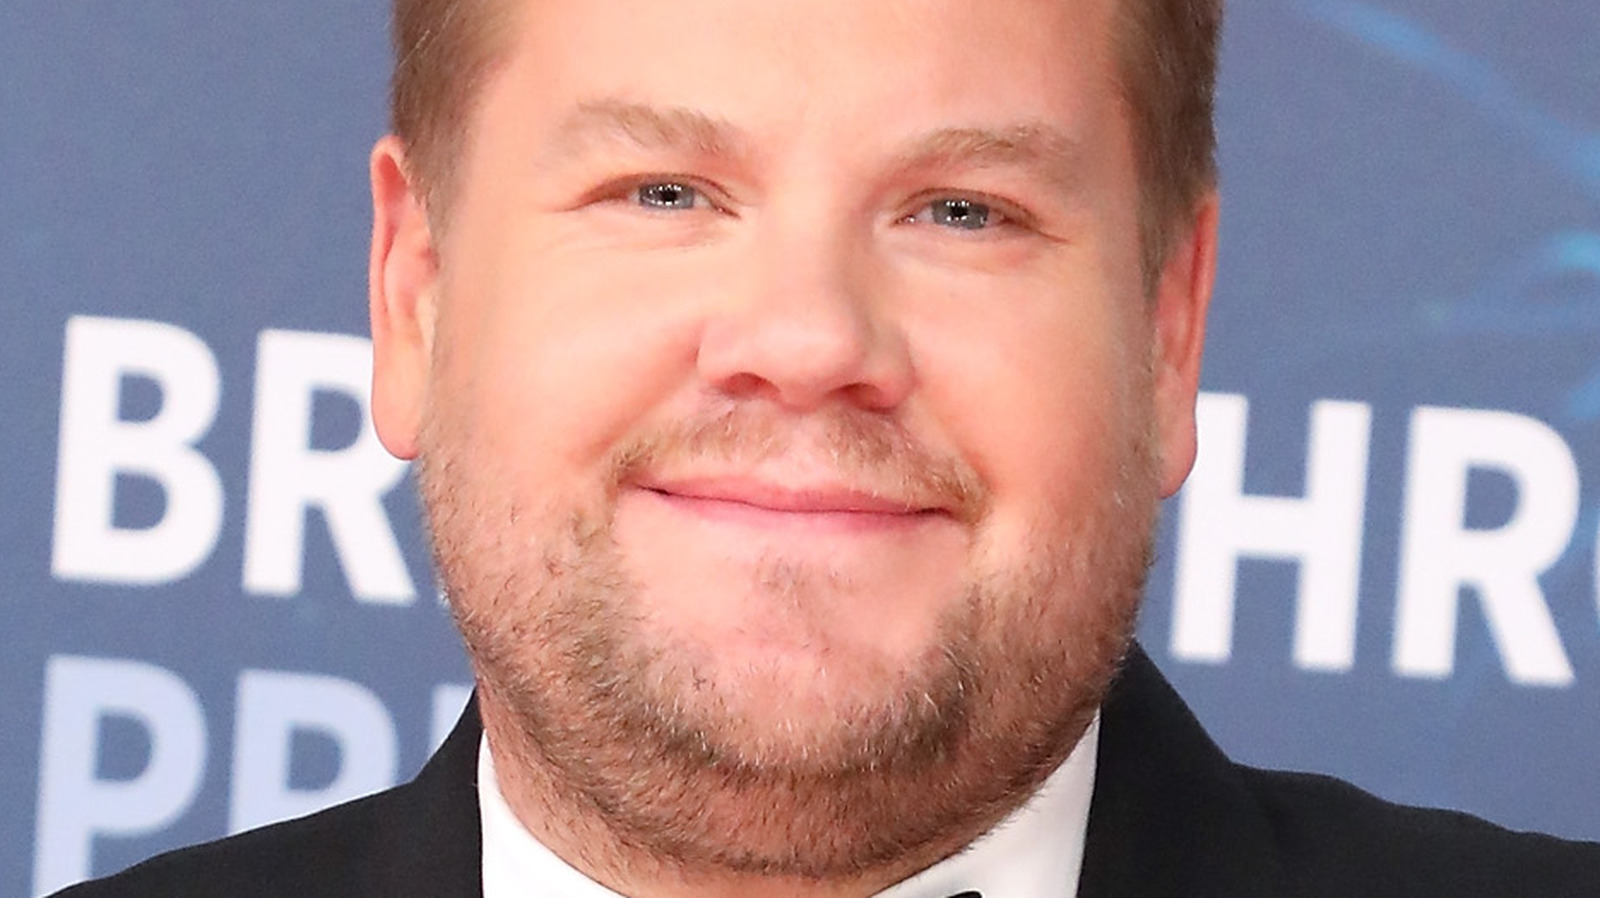 James Corden Is Going To Make A Huge Move When The Late Late Show Ends